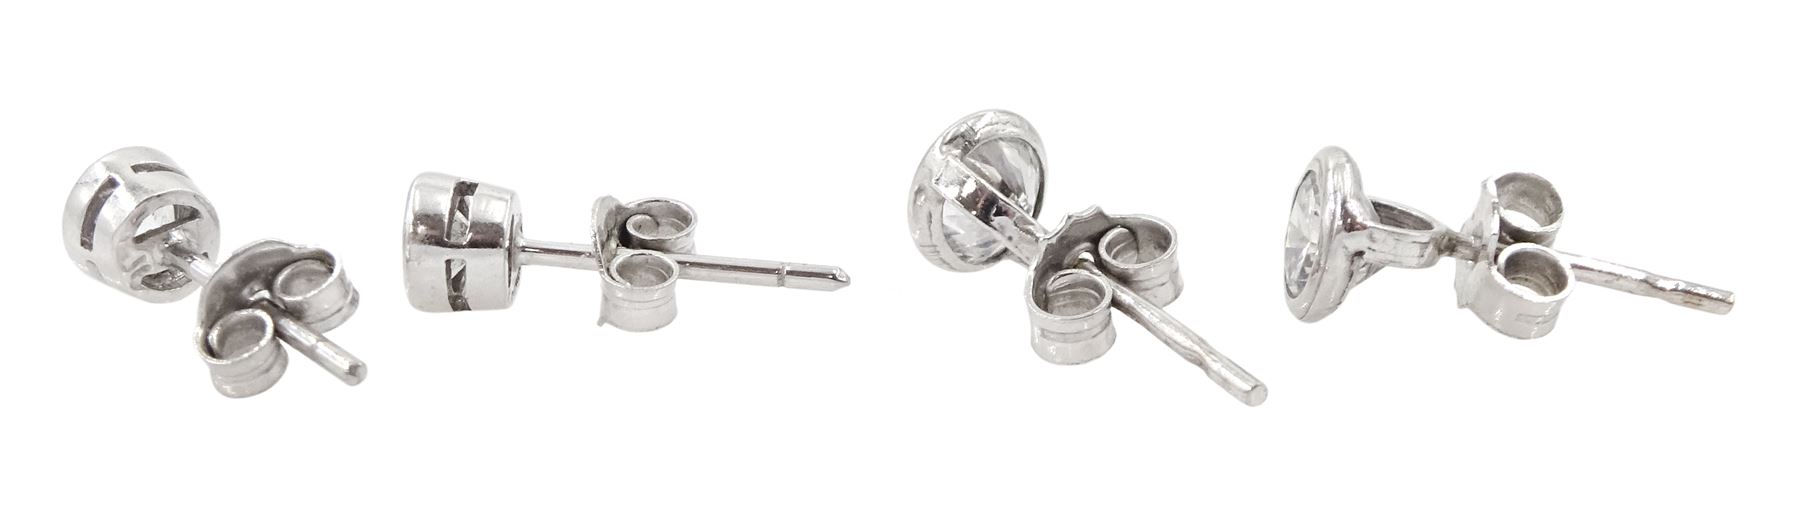 Pair of 9ct white gold white sapphire stud earrings and a similar pair of 9ct white gold cubic zirco - Image 2 of 2